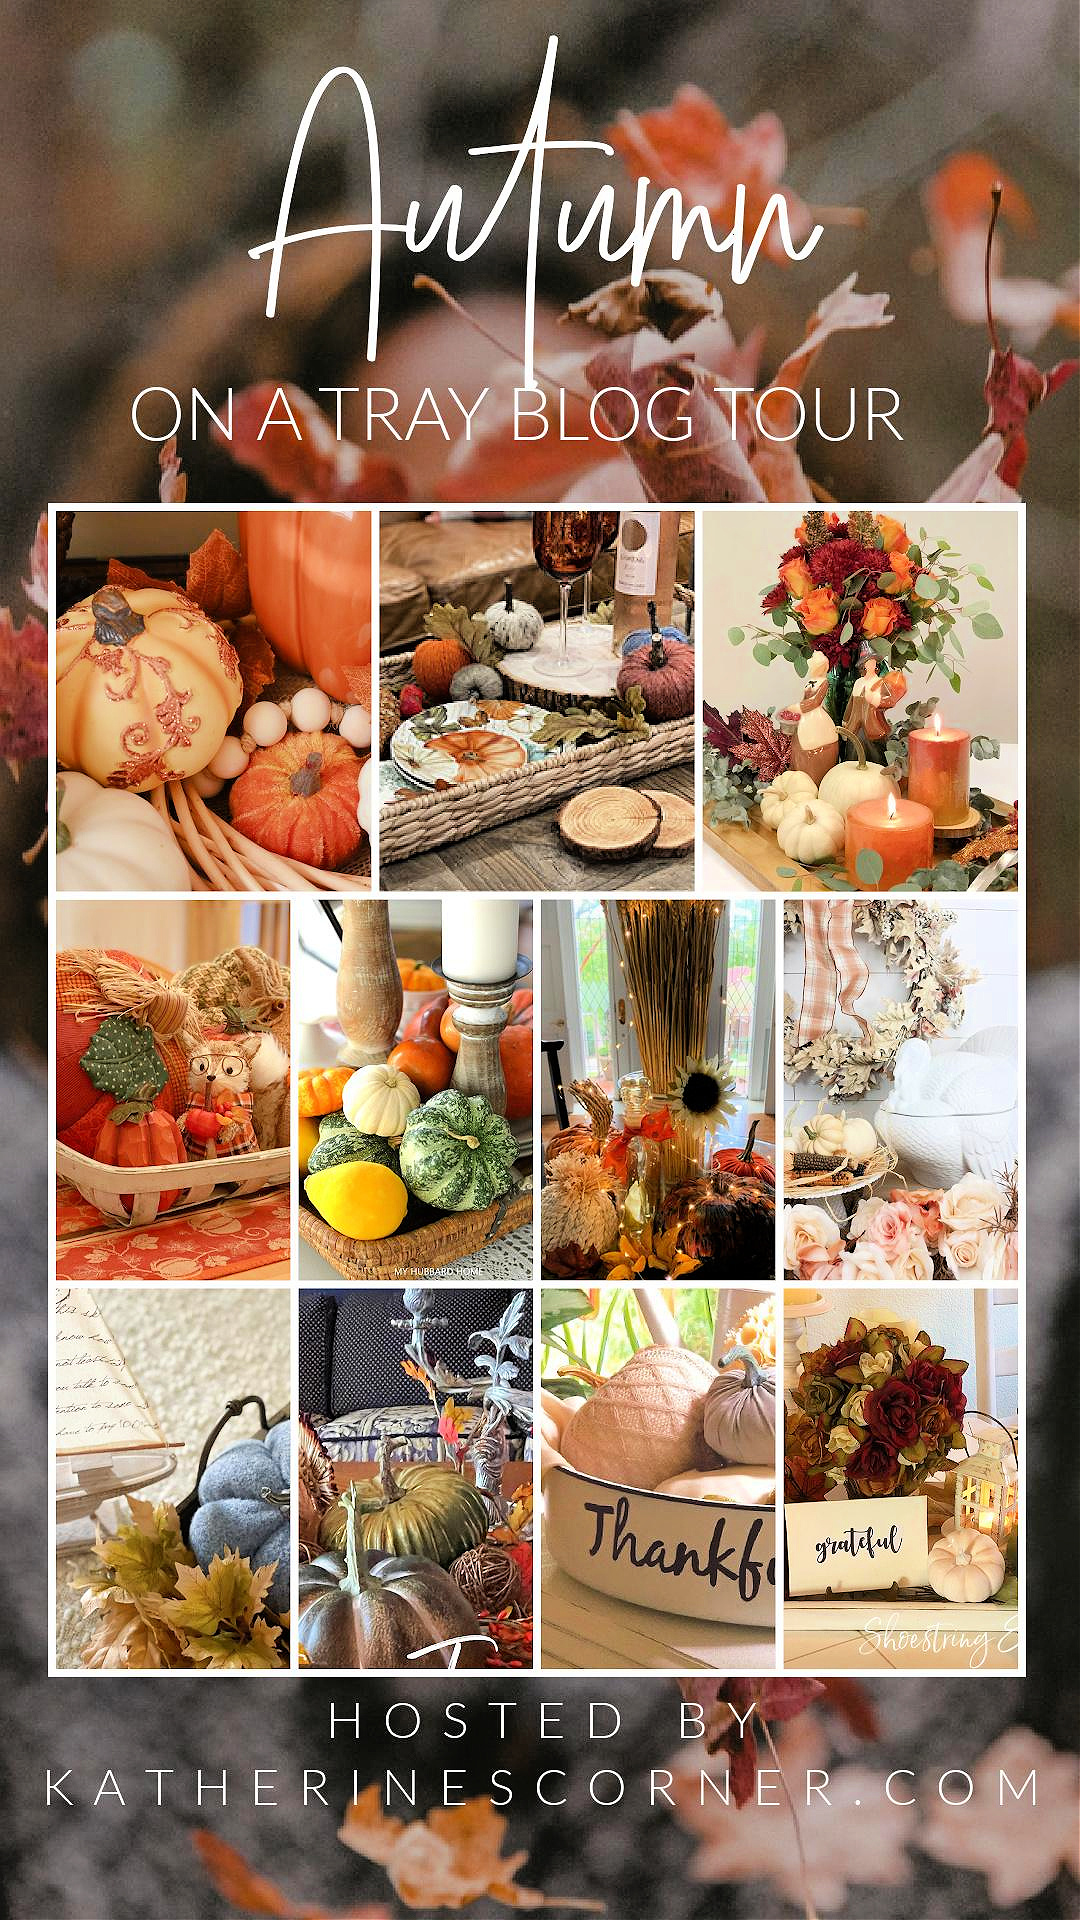 How to Create a Thanksgiving Vignette